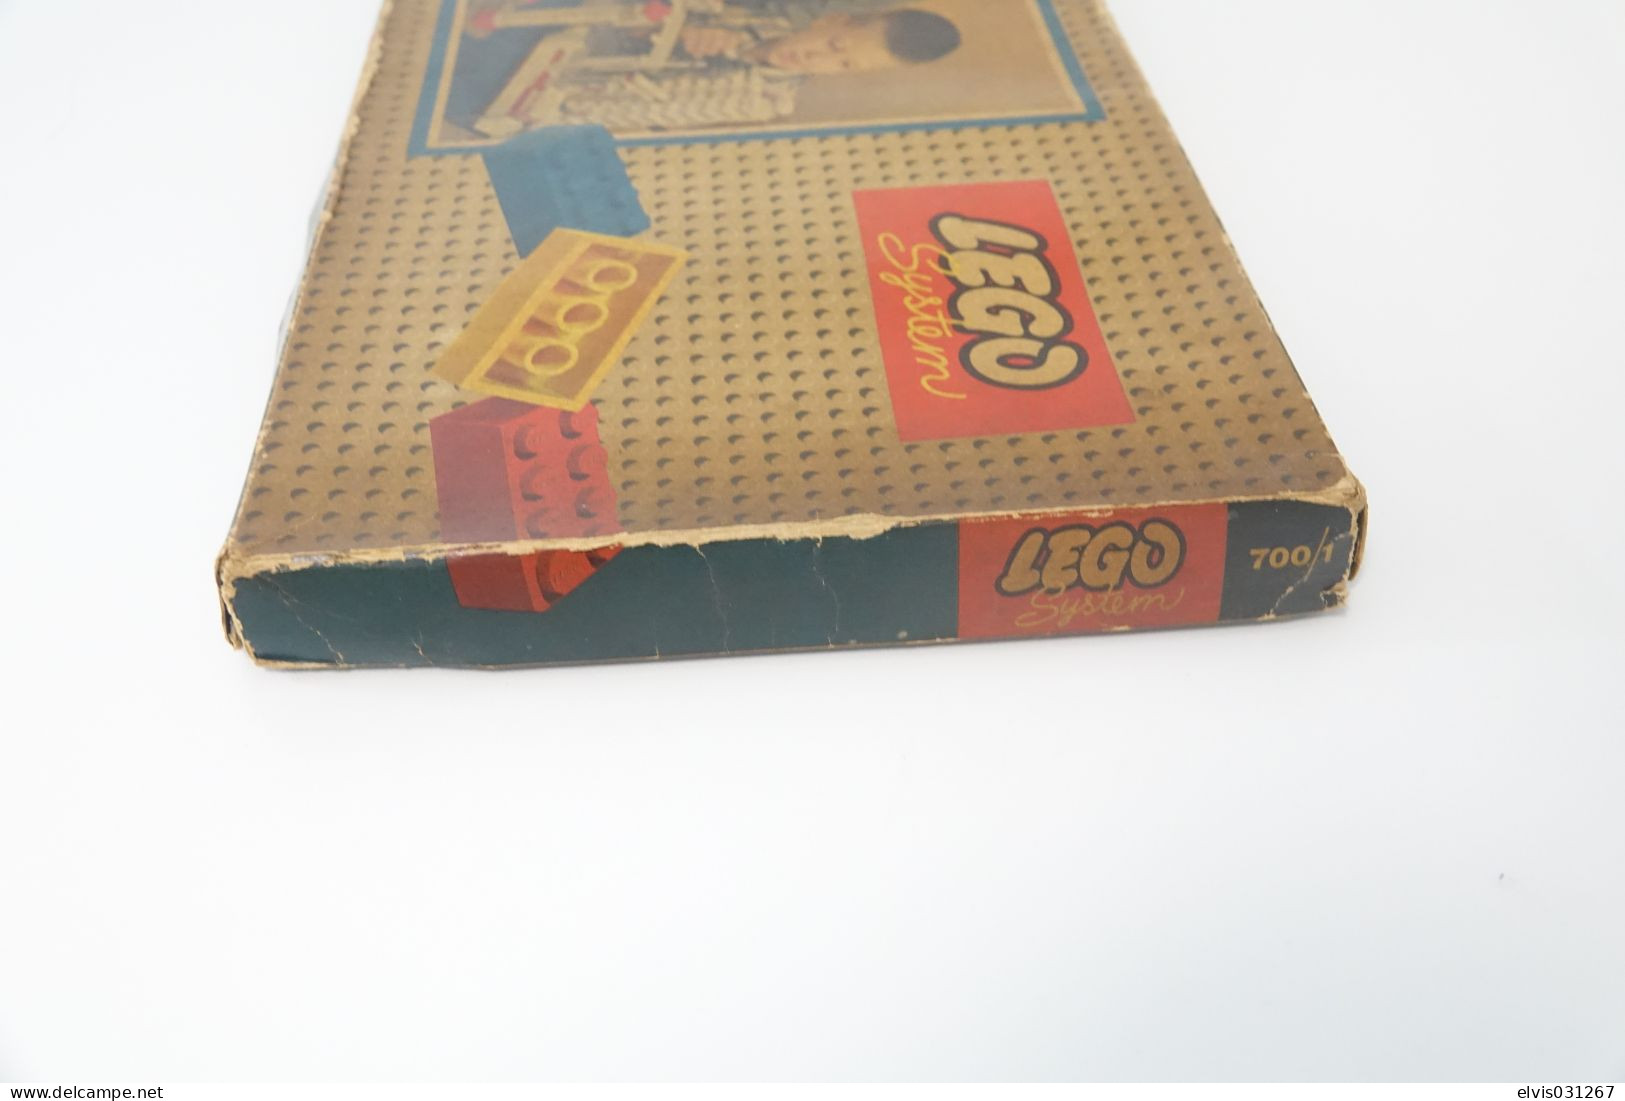 LEGO - 700/1 Gift Package (Lego Mursten) Extremely Rare 1st Edition - Collector Item - Original Lego 1956 - Vintage - Catalogues